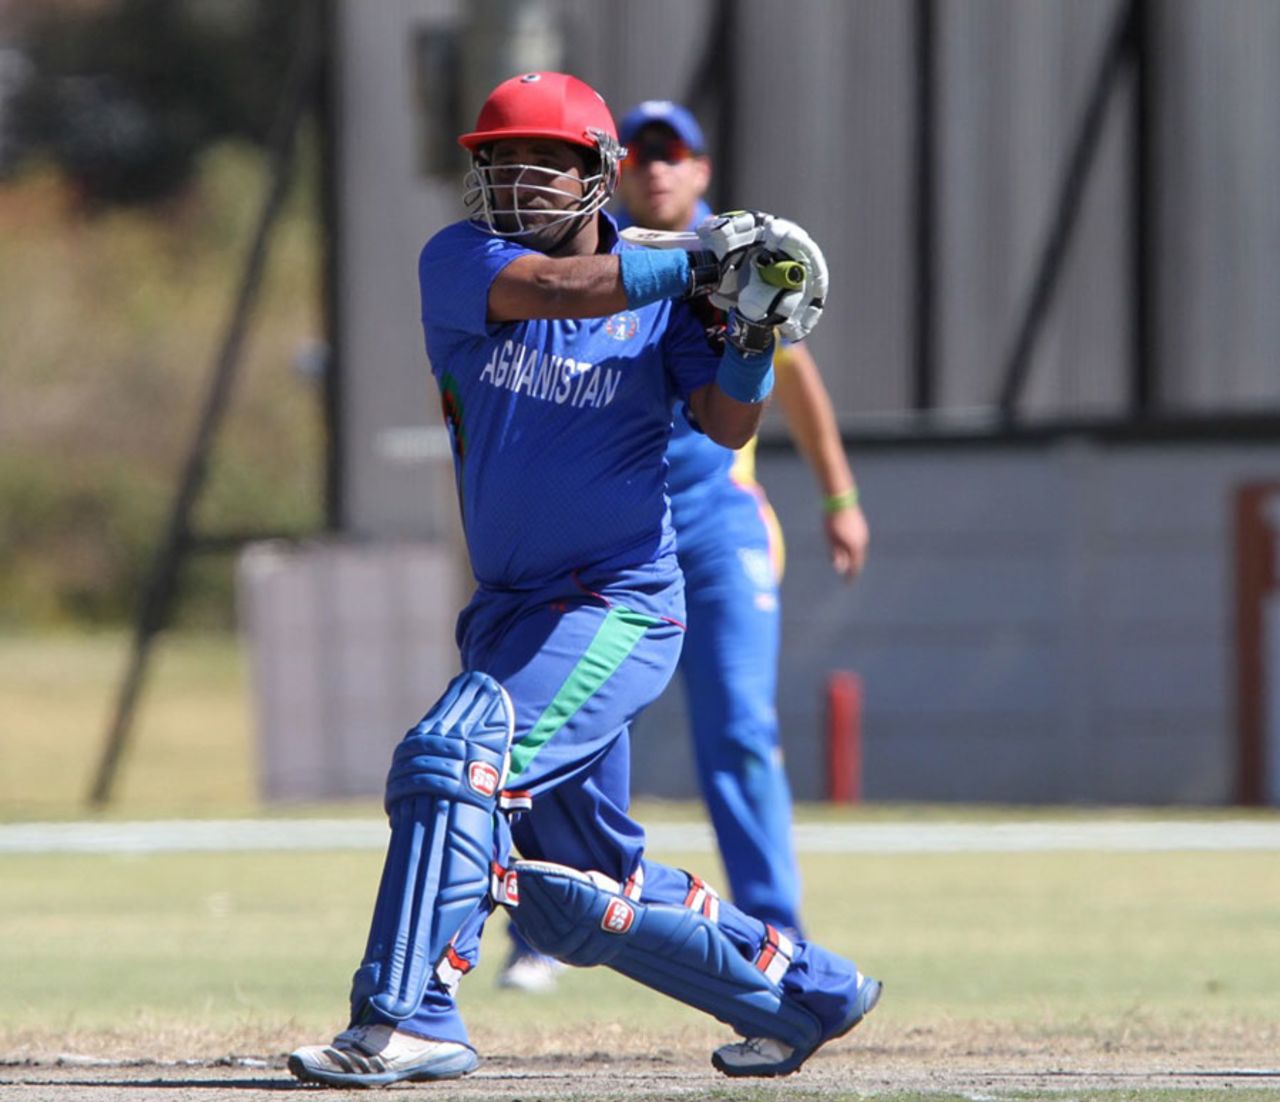 Mohammad Shahzad scored his seventh List A hundred, Namibia v Afghanistan, WCL Championship, Windhoek, August 9, 2013